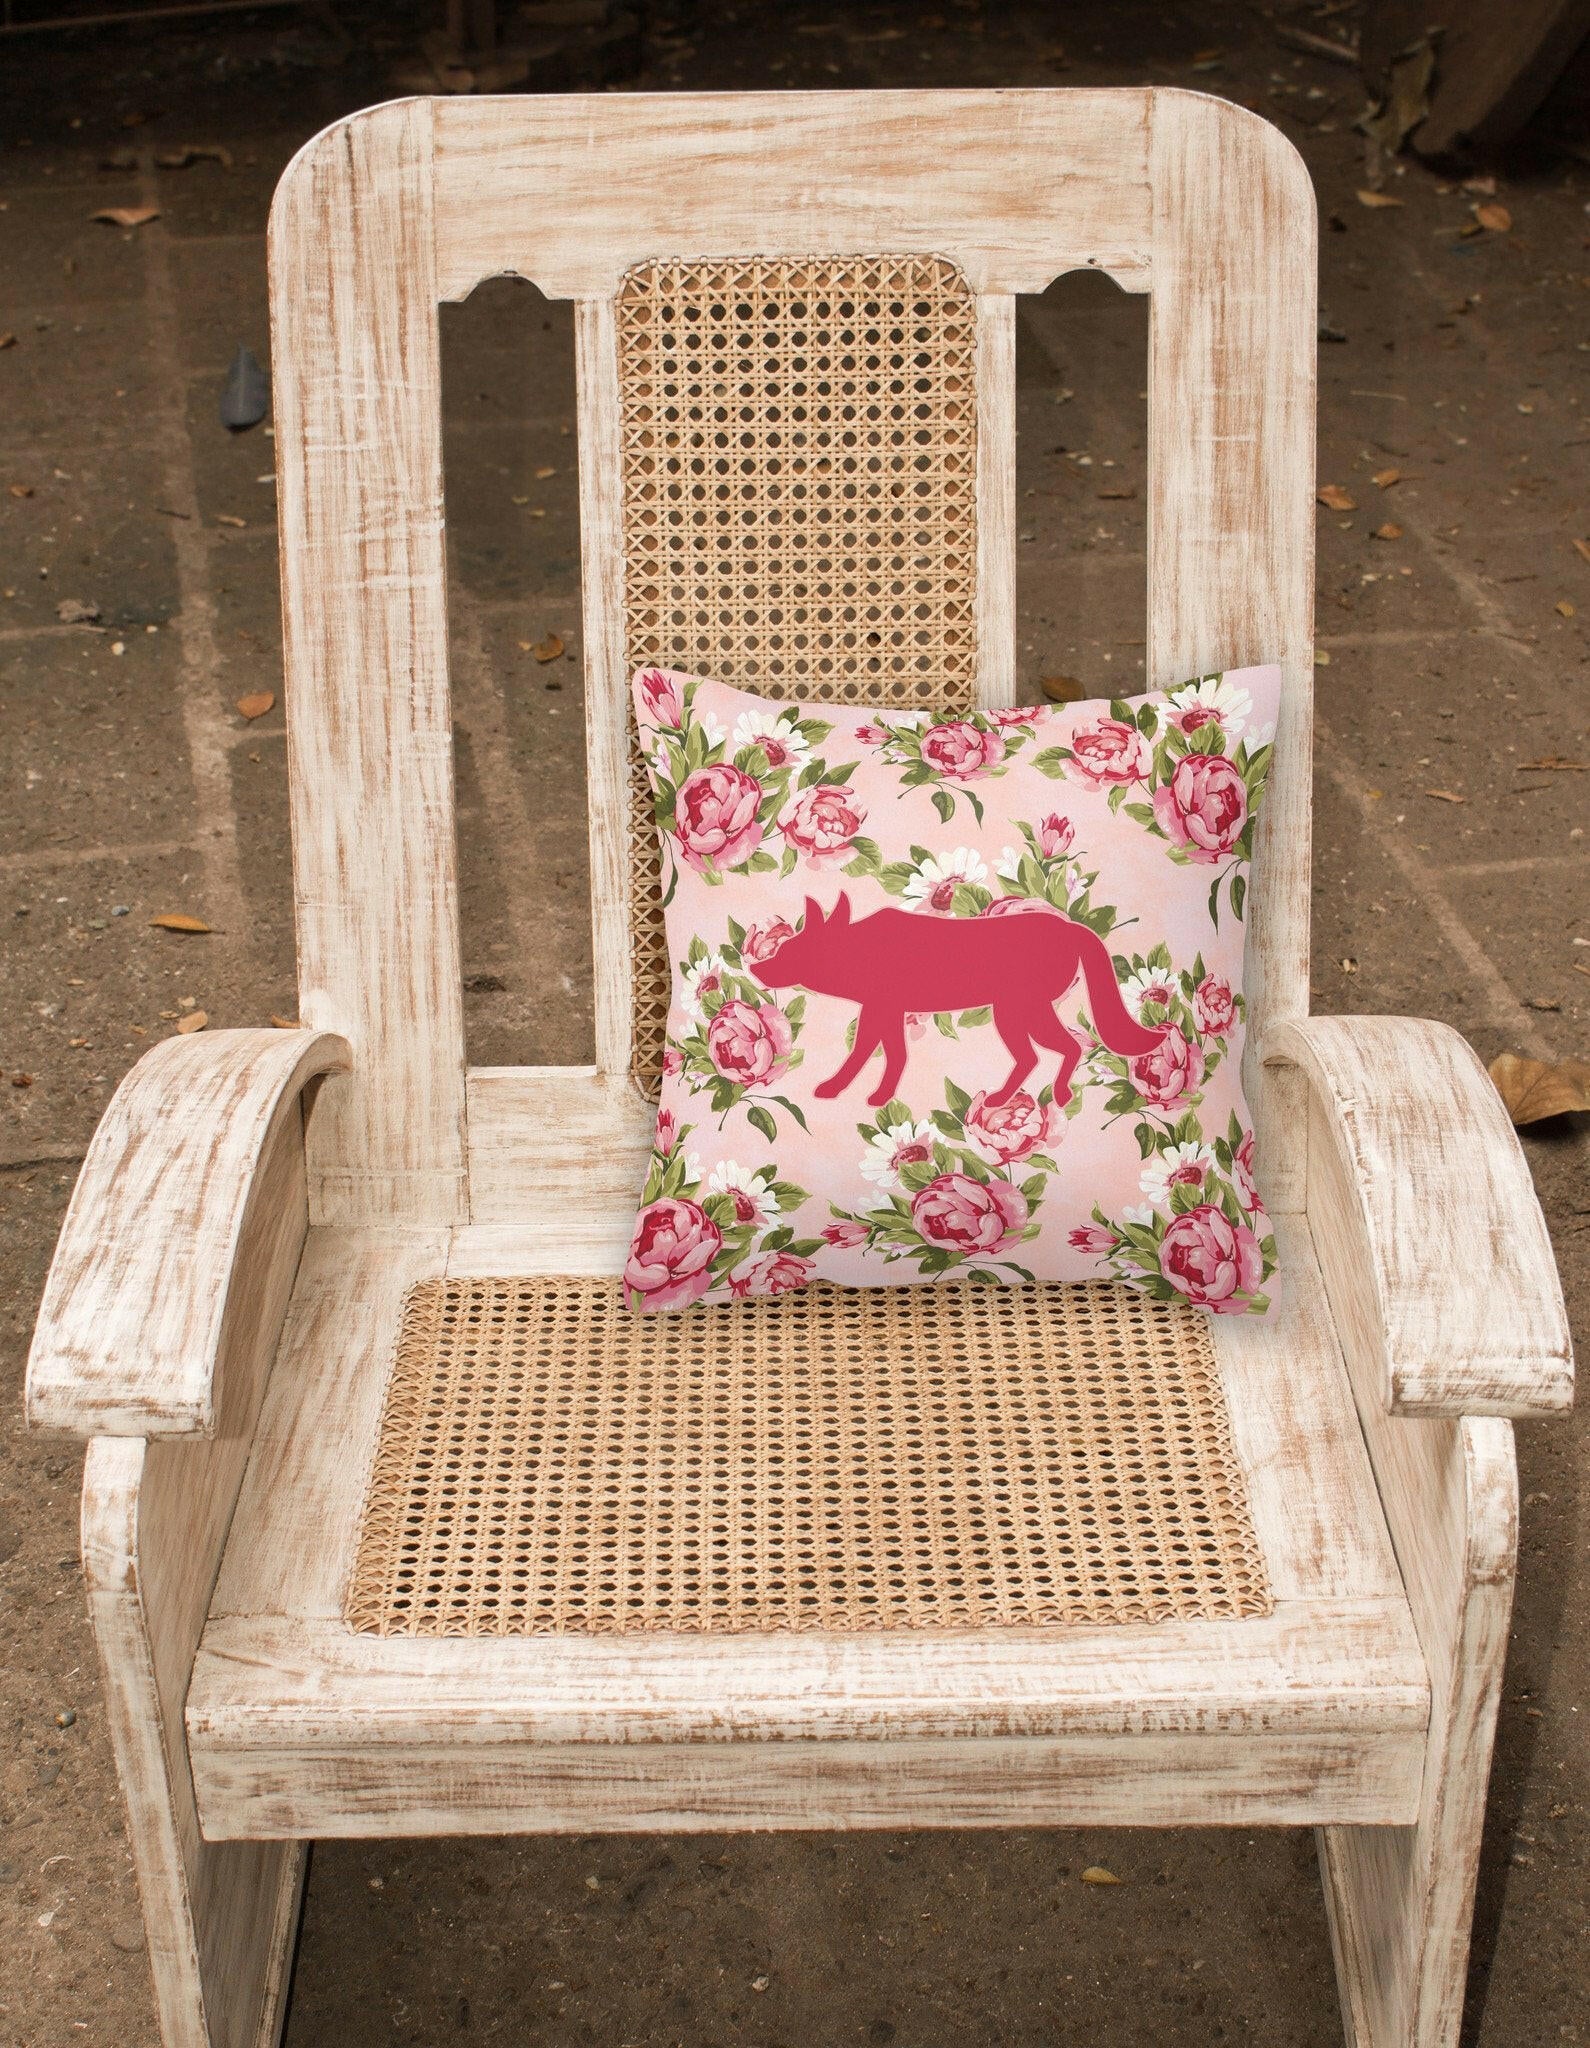 Wolf Shabby Chic Pink Roses  Fabric Decorative Pillow BB1123-RS-PK-PW1414 - the-store.com